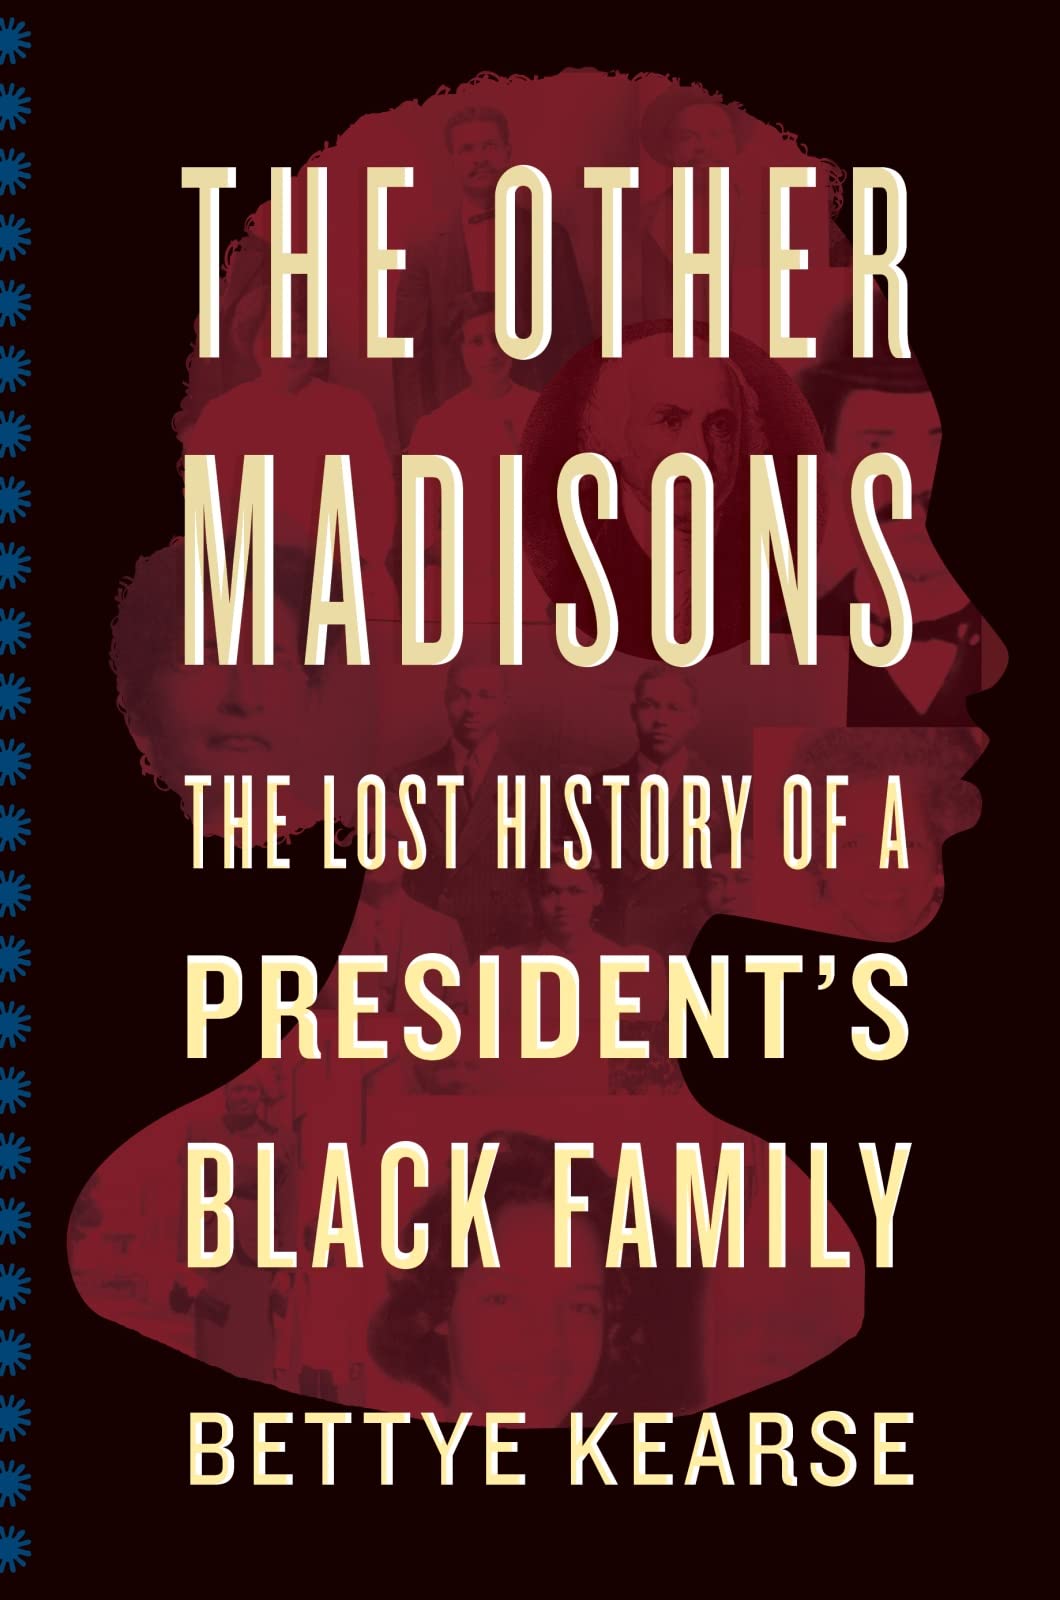 The Other Madison: The Lost History of a President's Black Family